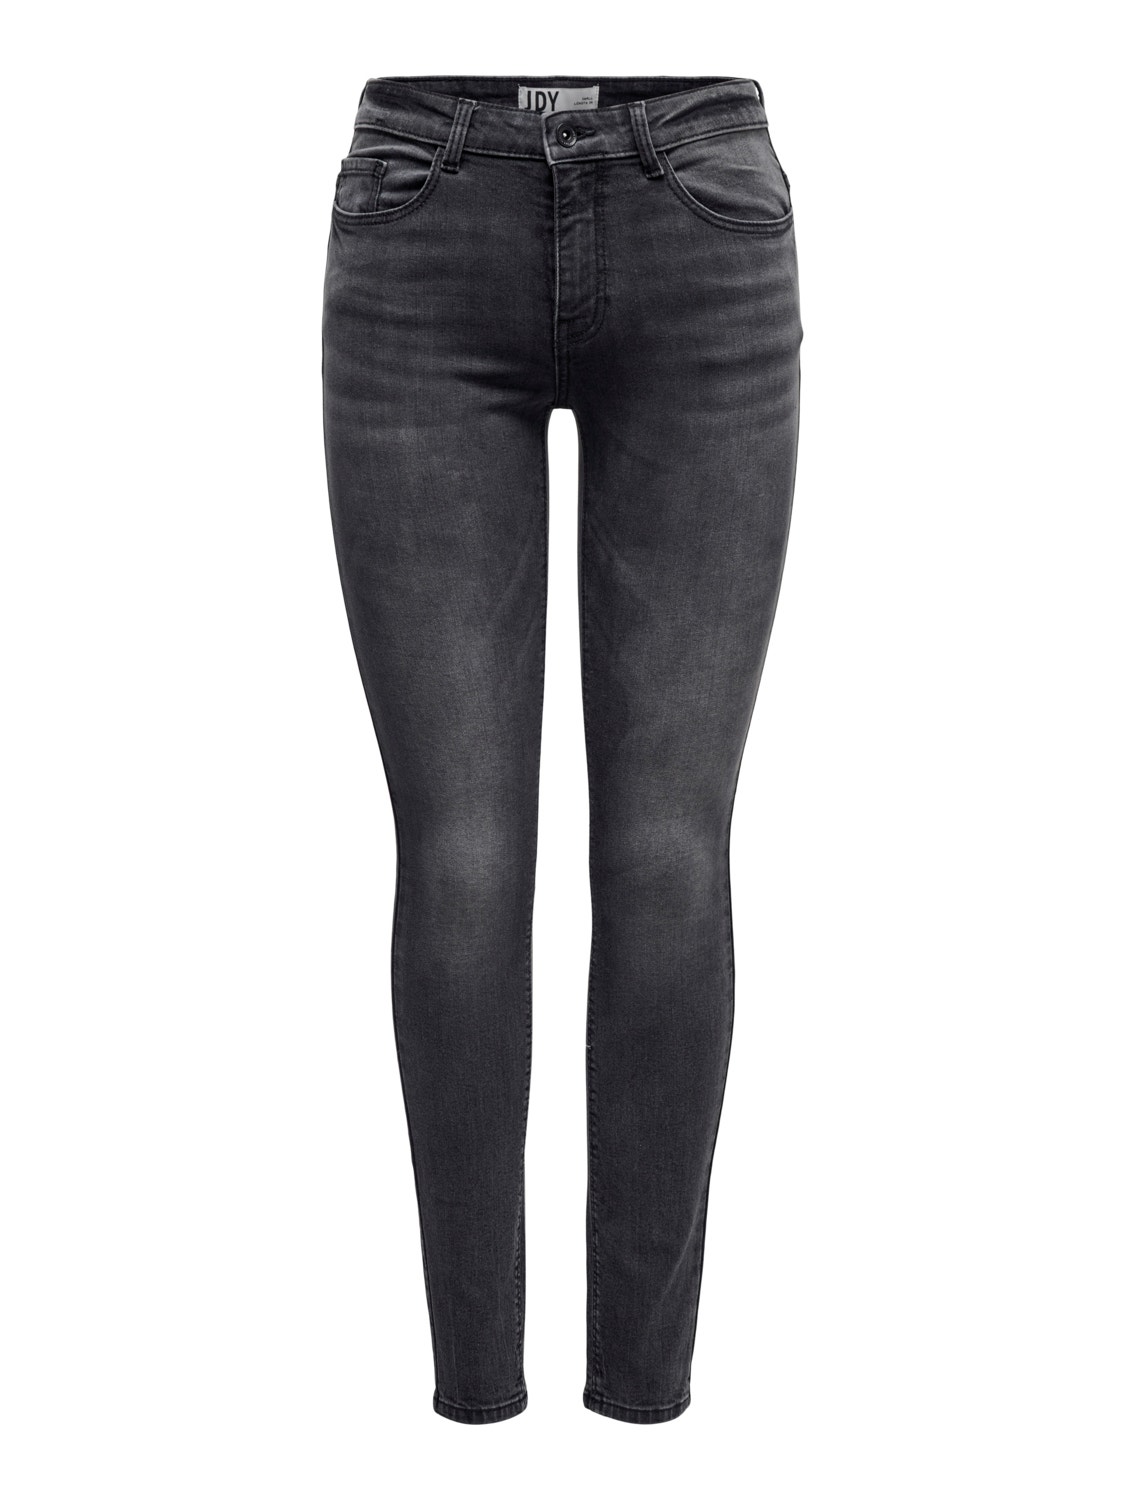 ONLY Jeans Skinny Fit Taille moyenne -Black Denim - 15267521